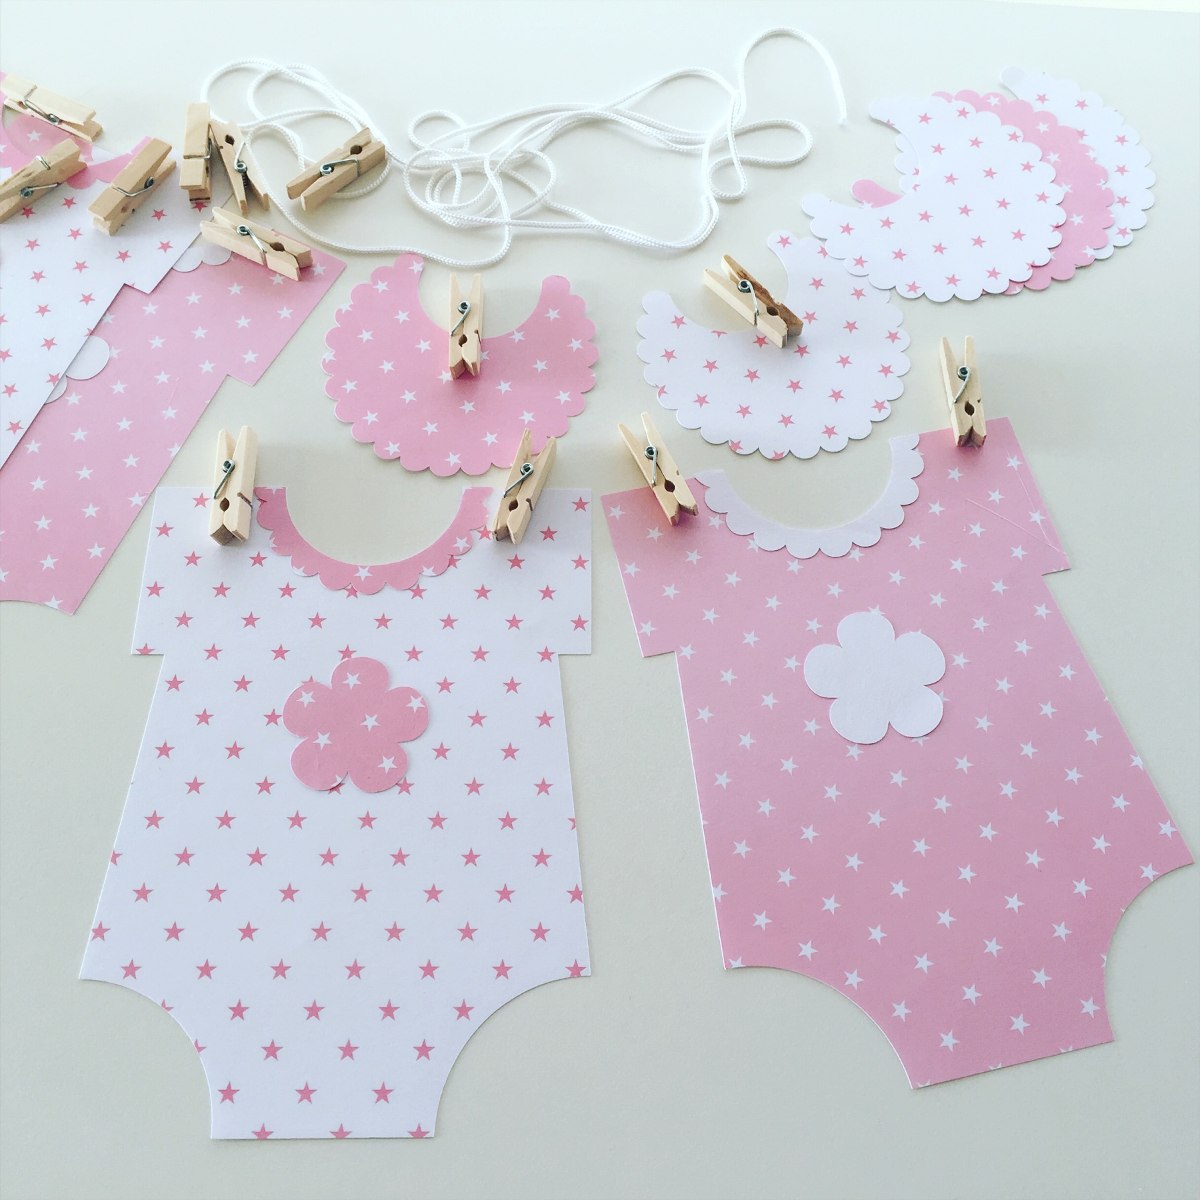 10 Bunting Flags Banners Garland Onesies Baby Shower Pink Diy Decor Make Your Baby Shower That Li Baby Shower Banner Diy Baby Shower Girl Diy Pink Baby Shower